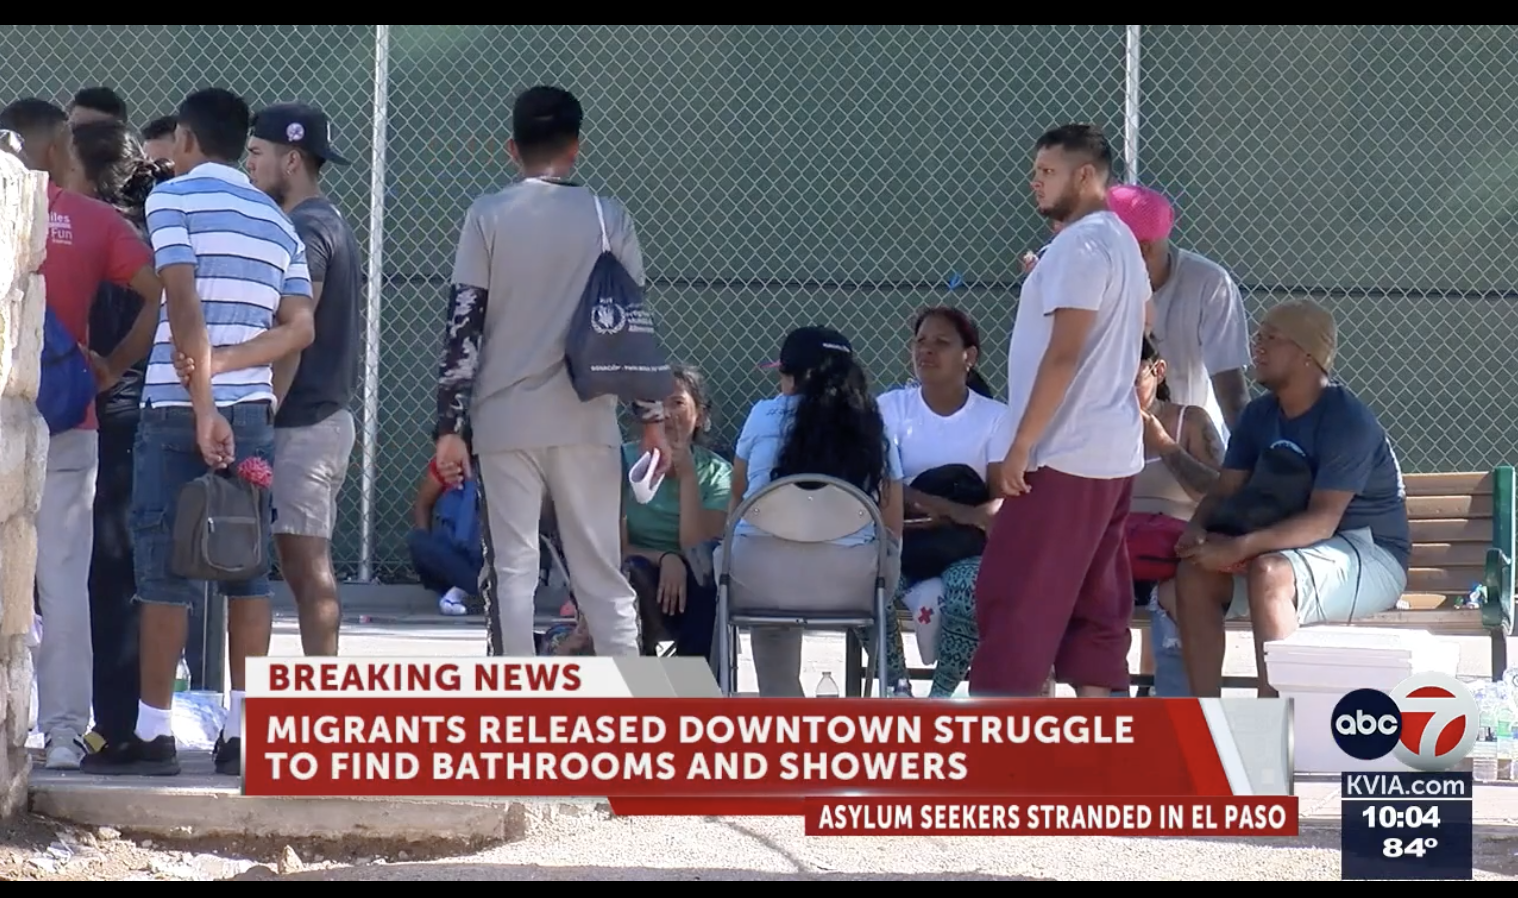 Migrants released on the streets of Downtown El Paso struggle to find bathrooms and showers